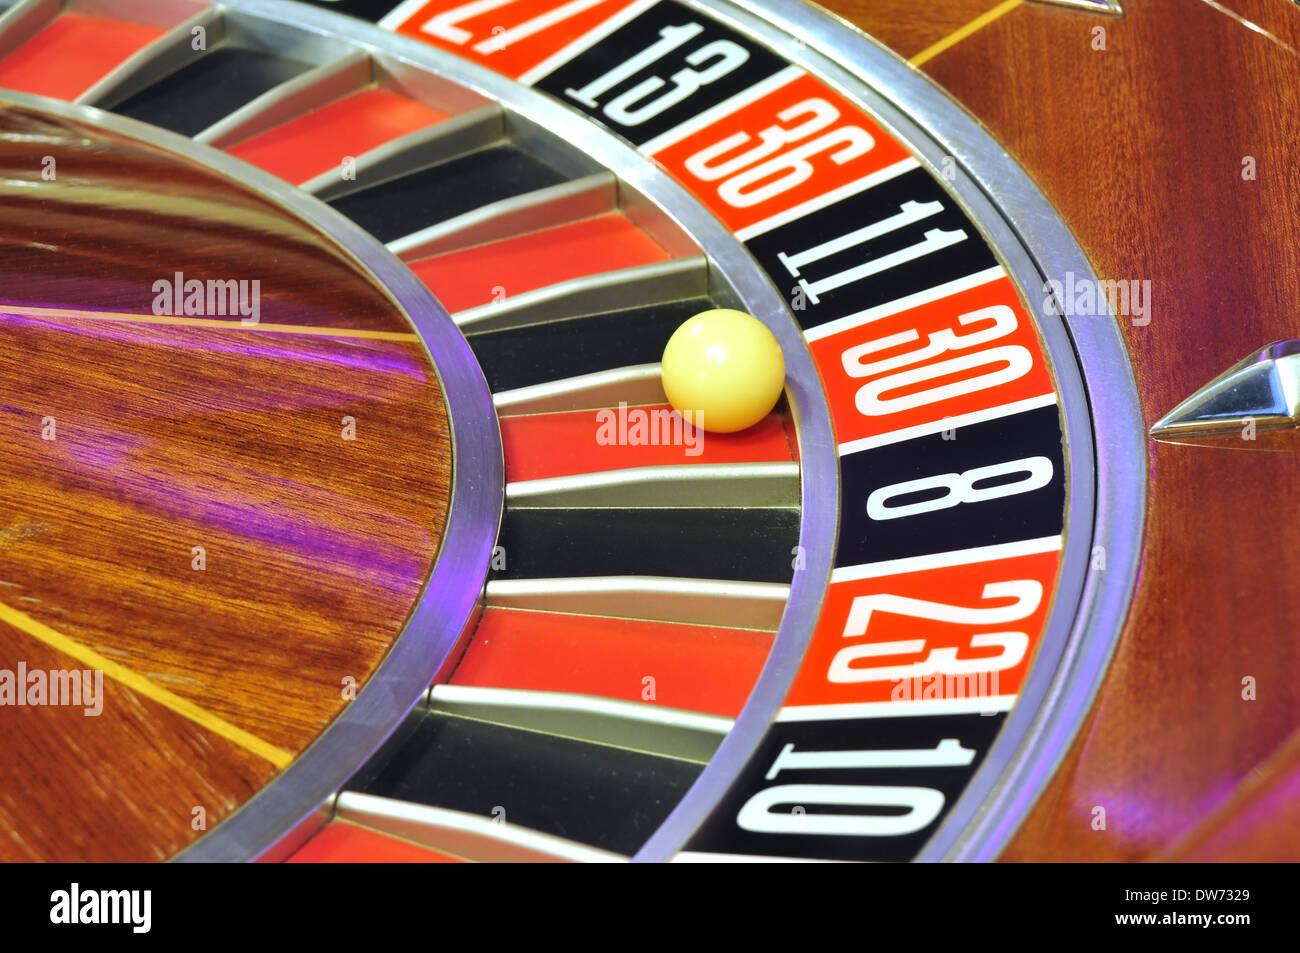 Image With A Casino Roulette Wheel With The Ball On Number 30 Stock Photo Alamy